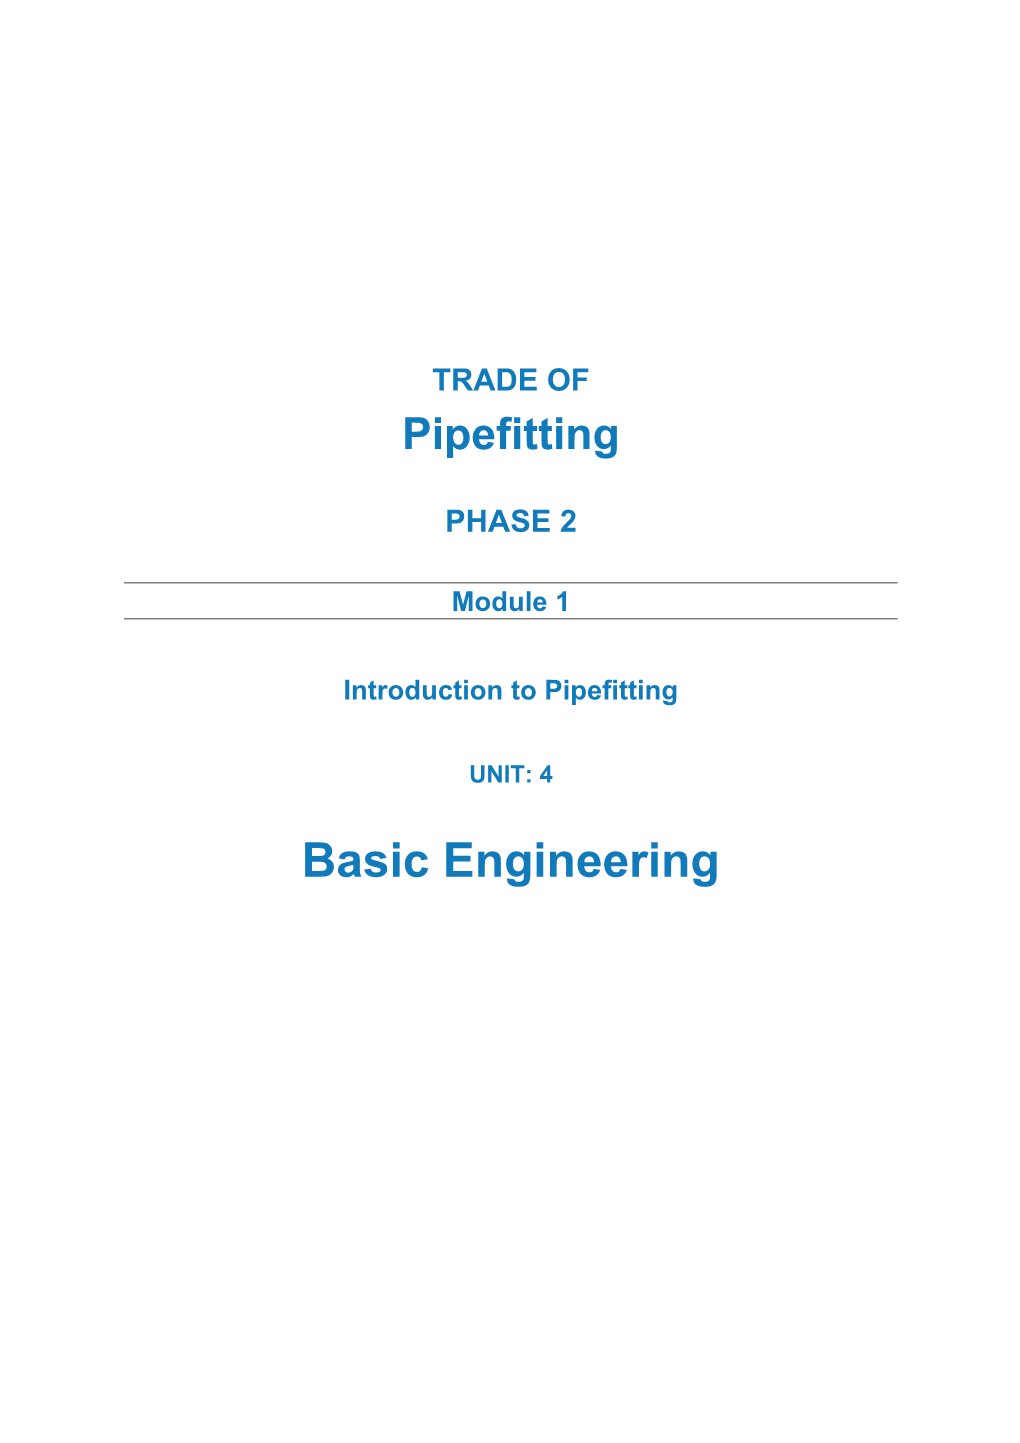 Introduction to Pipefitting